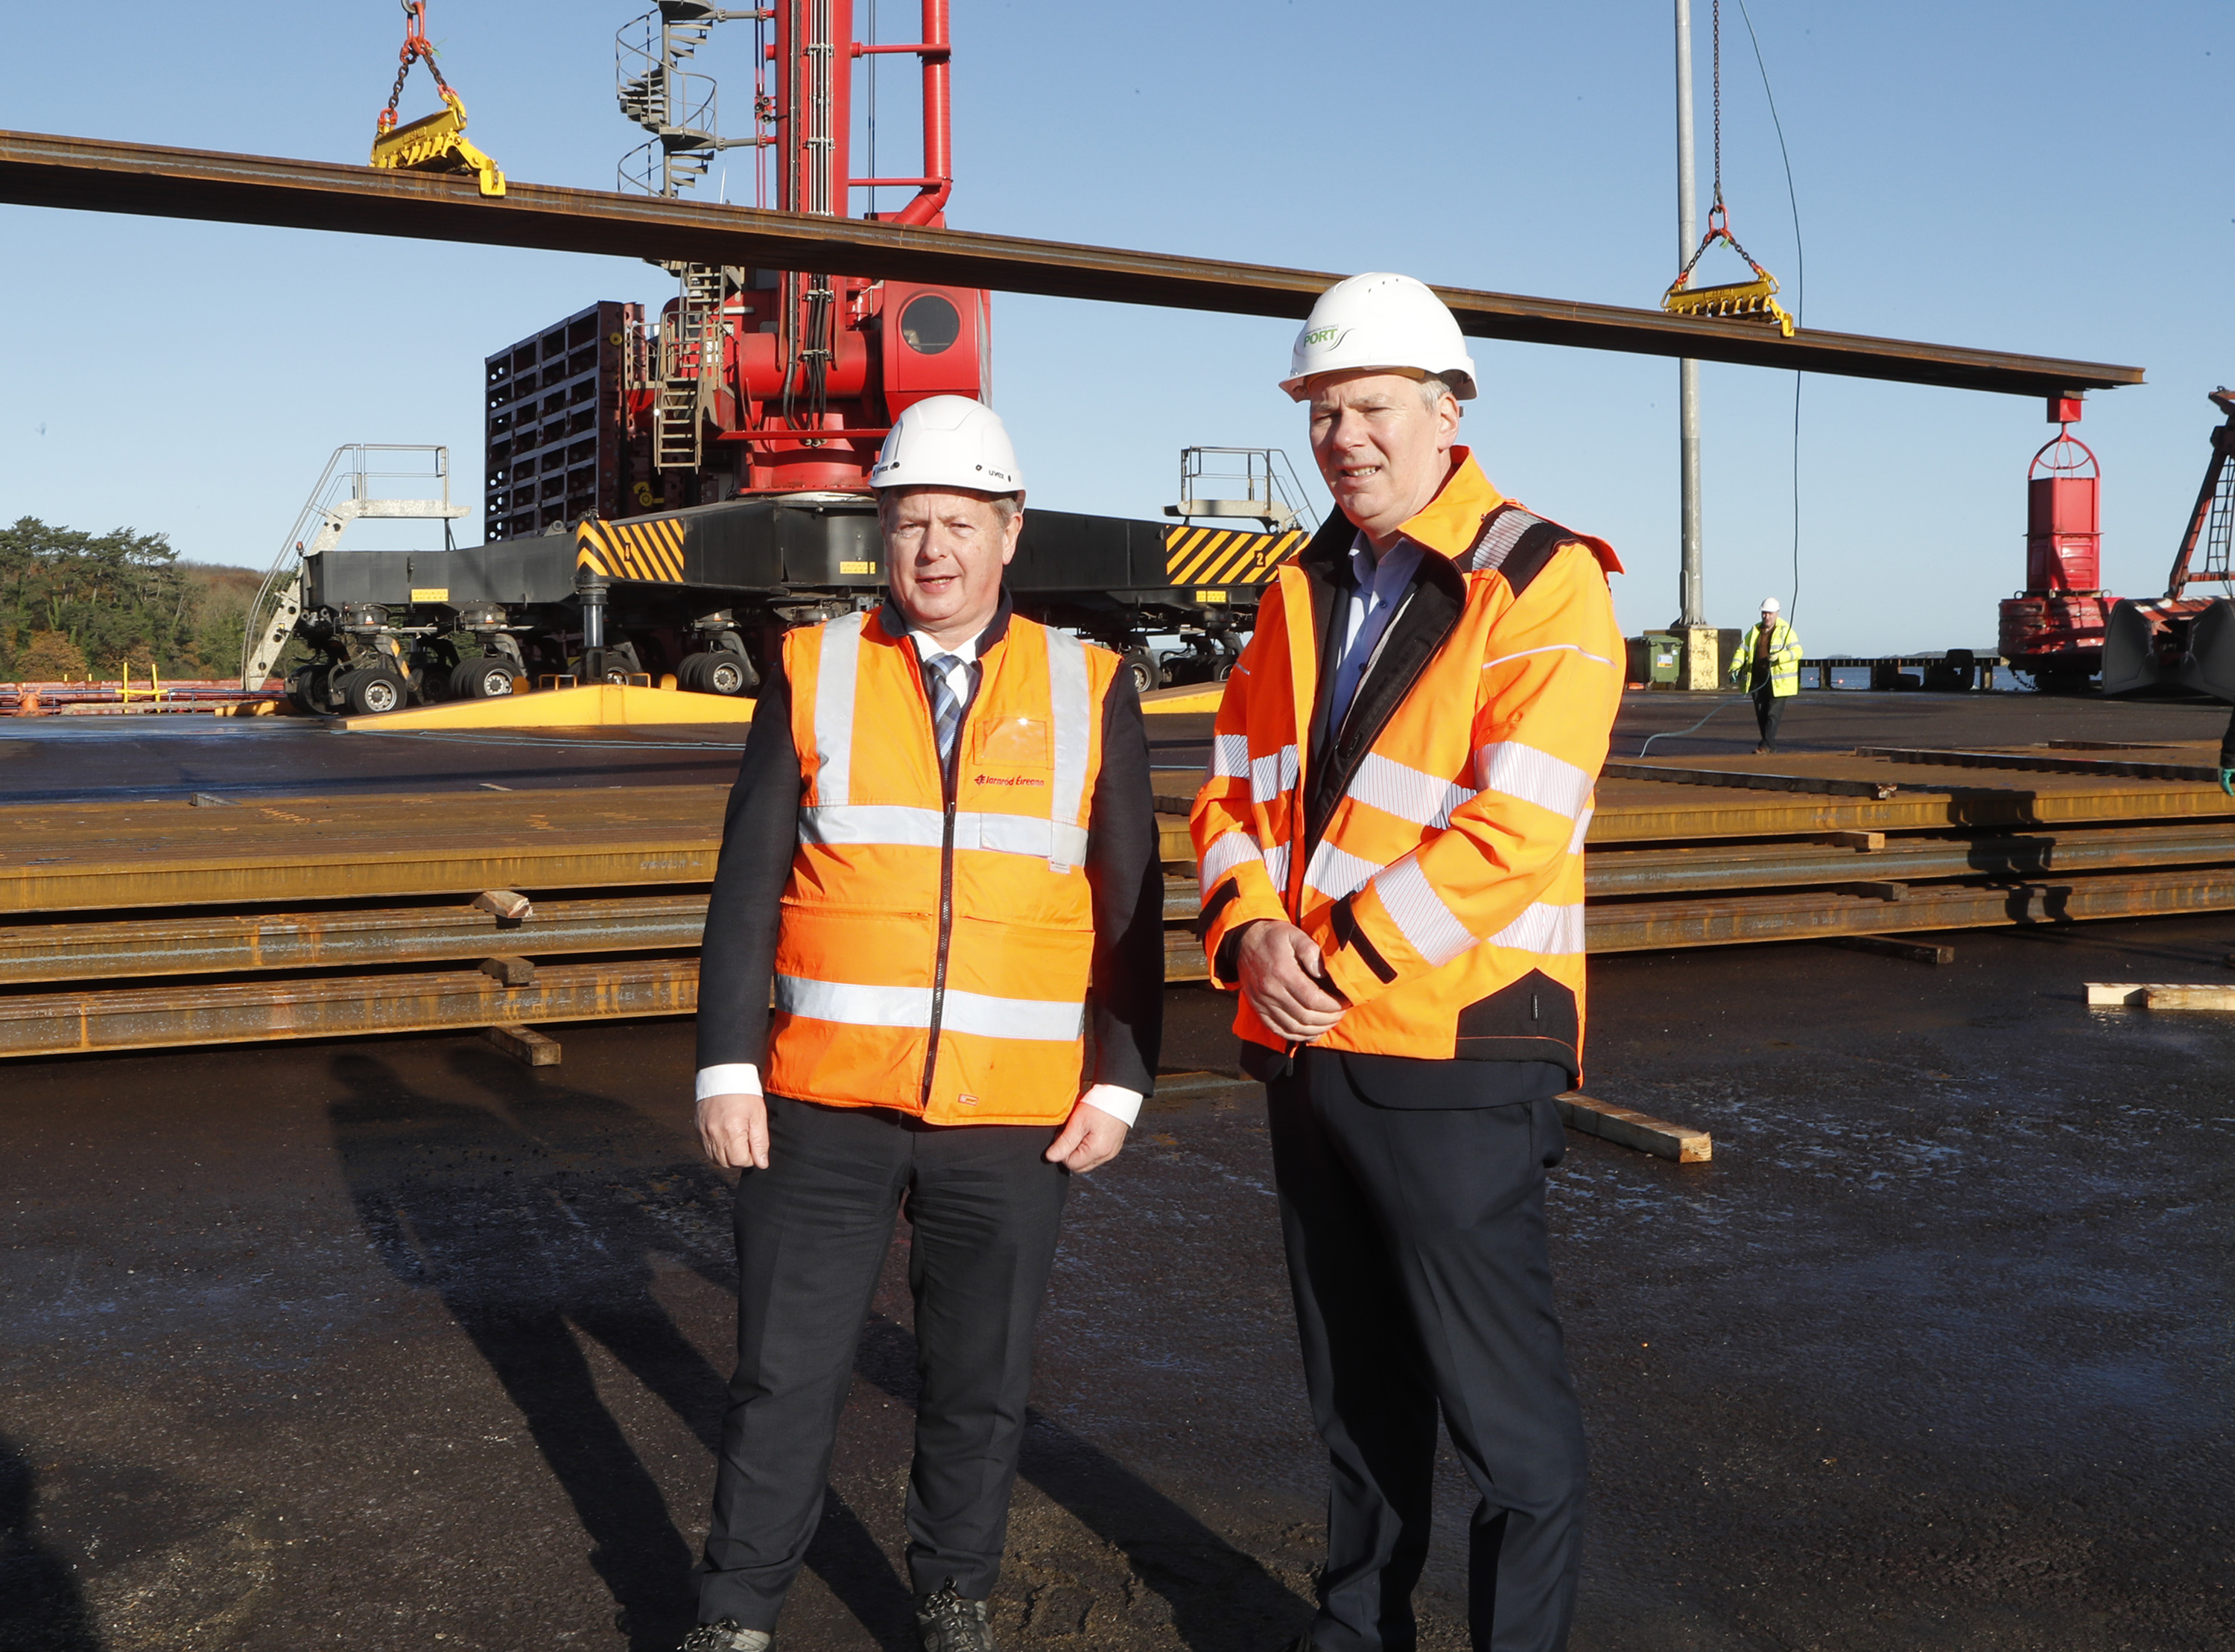 Our CEO, Jim Meade with Pat Keating, CEO of Shannon Foynes Port Company at the unloading of track for the project at the port